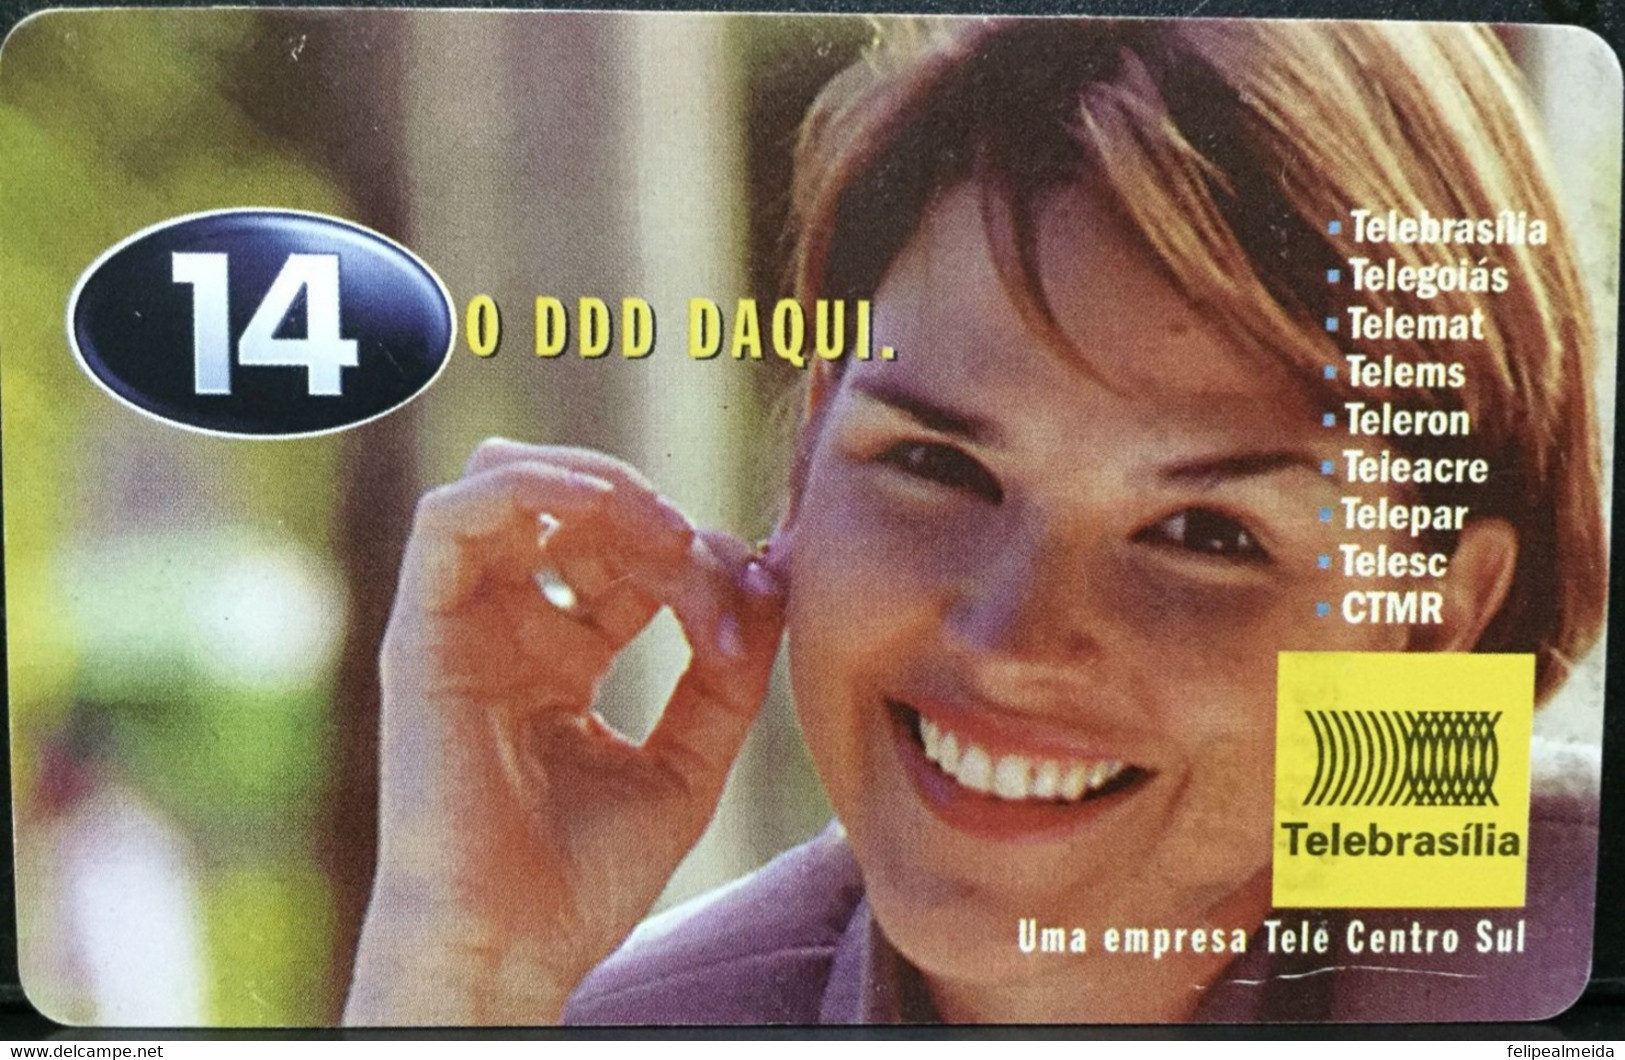 Phone Card Manufactured By Telebrasilia In 1999 - Information Card On The Use Of DDD In Calls - Telecom